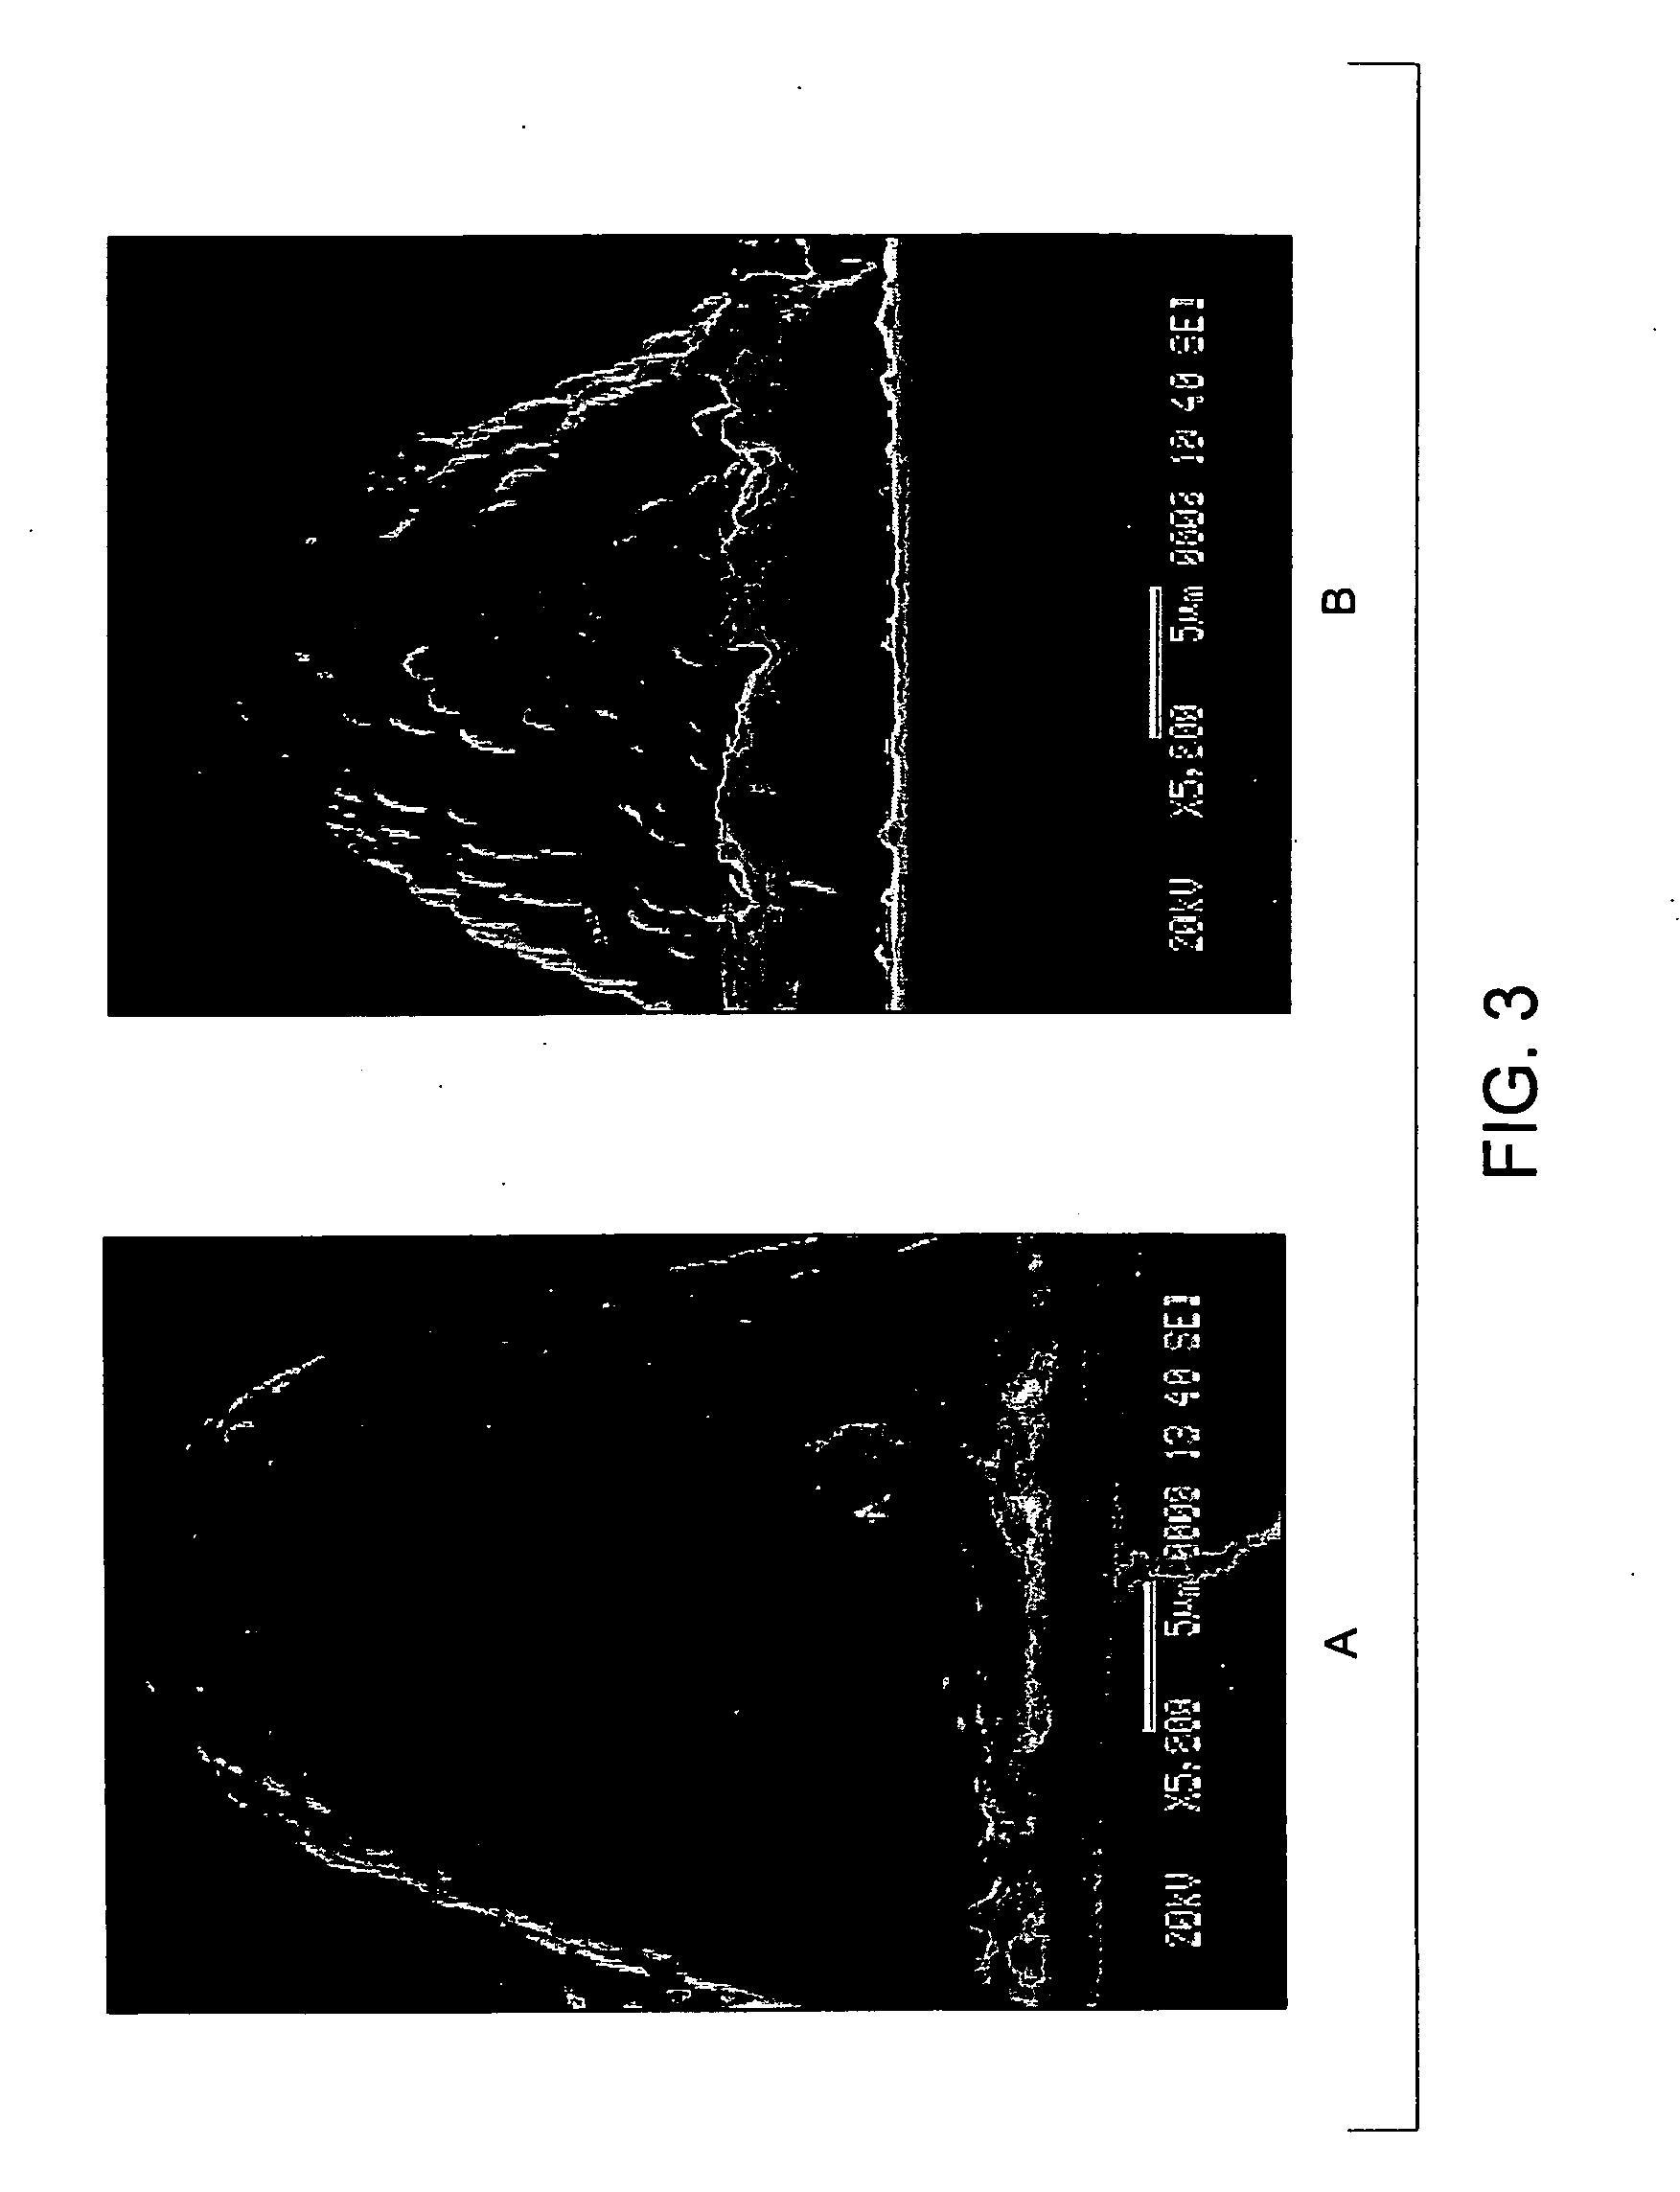 Superhydrophobic coating composition and coated articles obtained therefrom